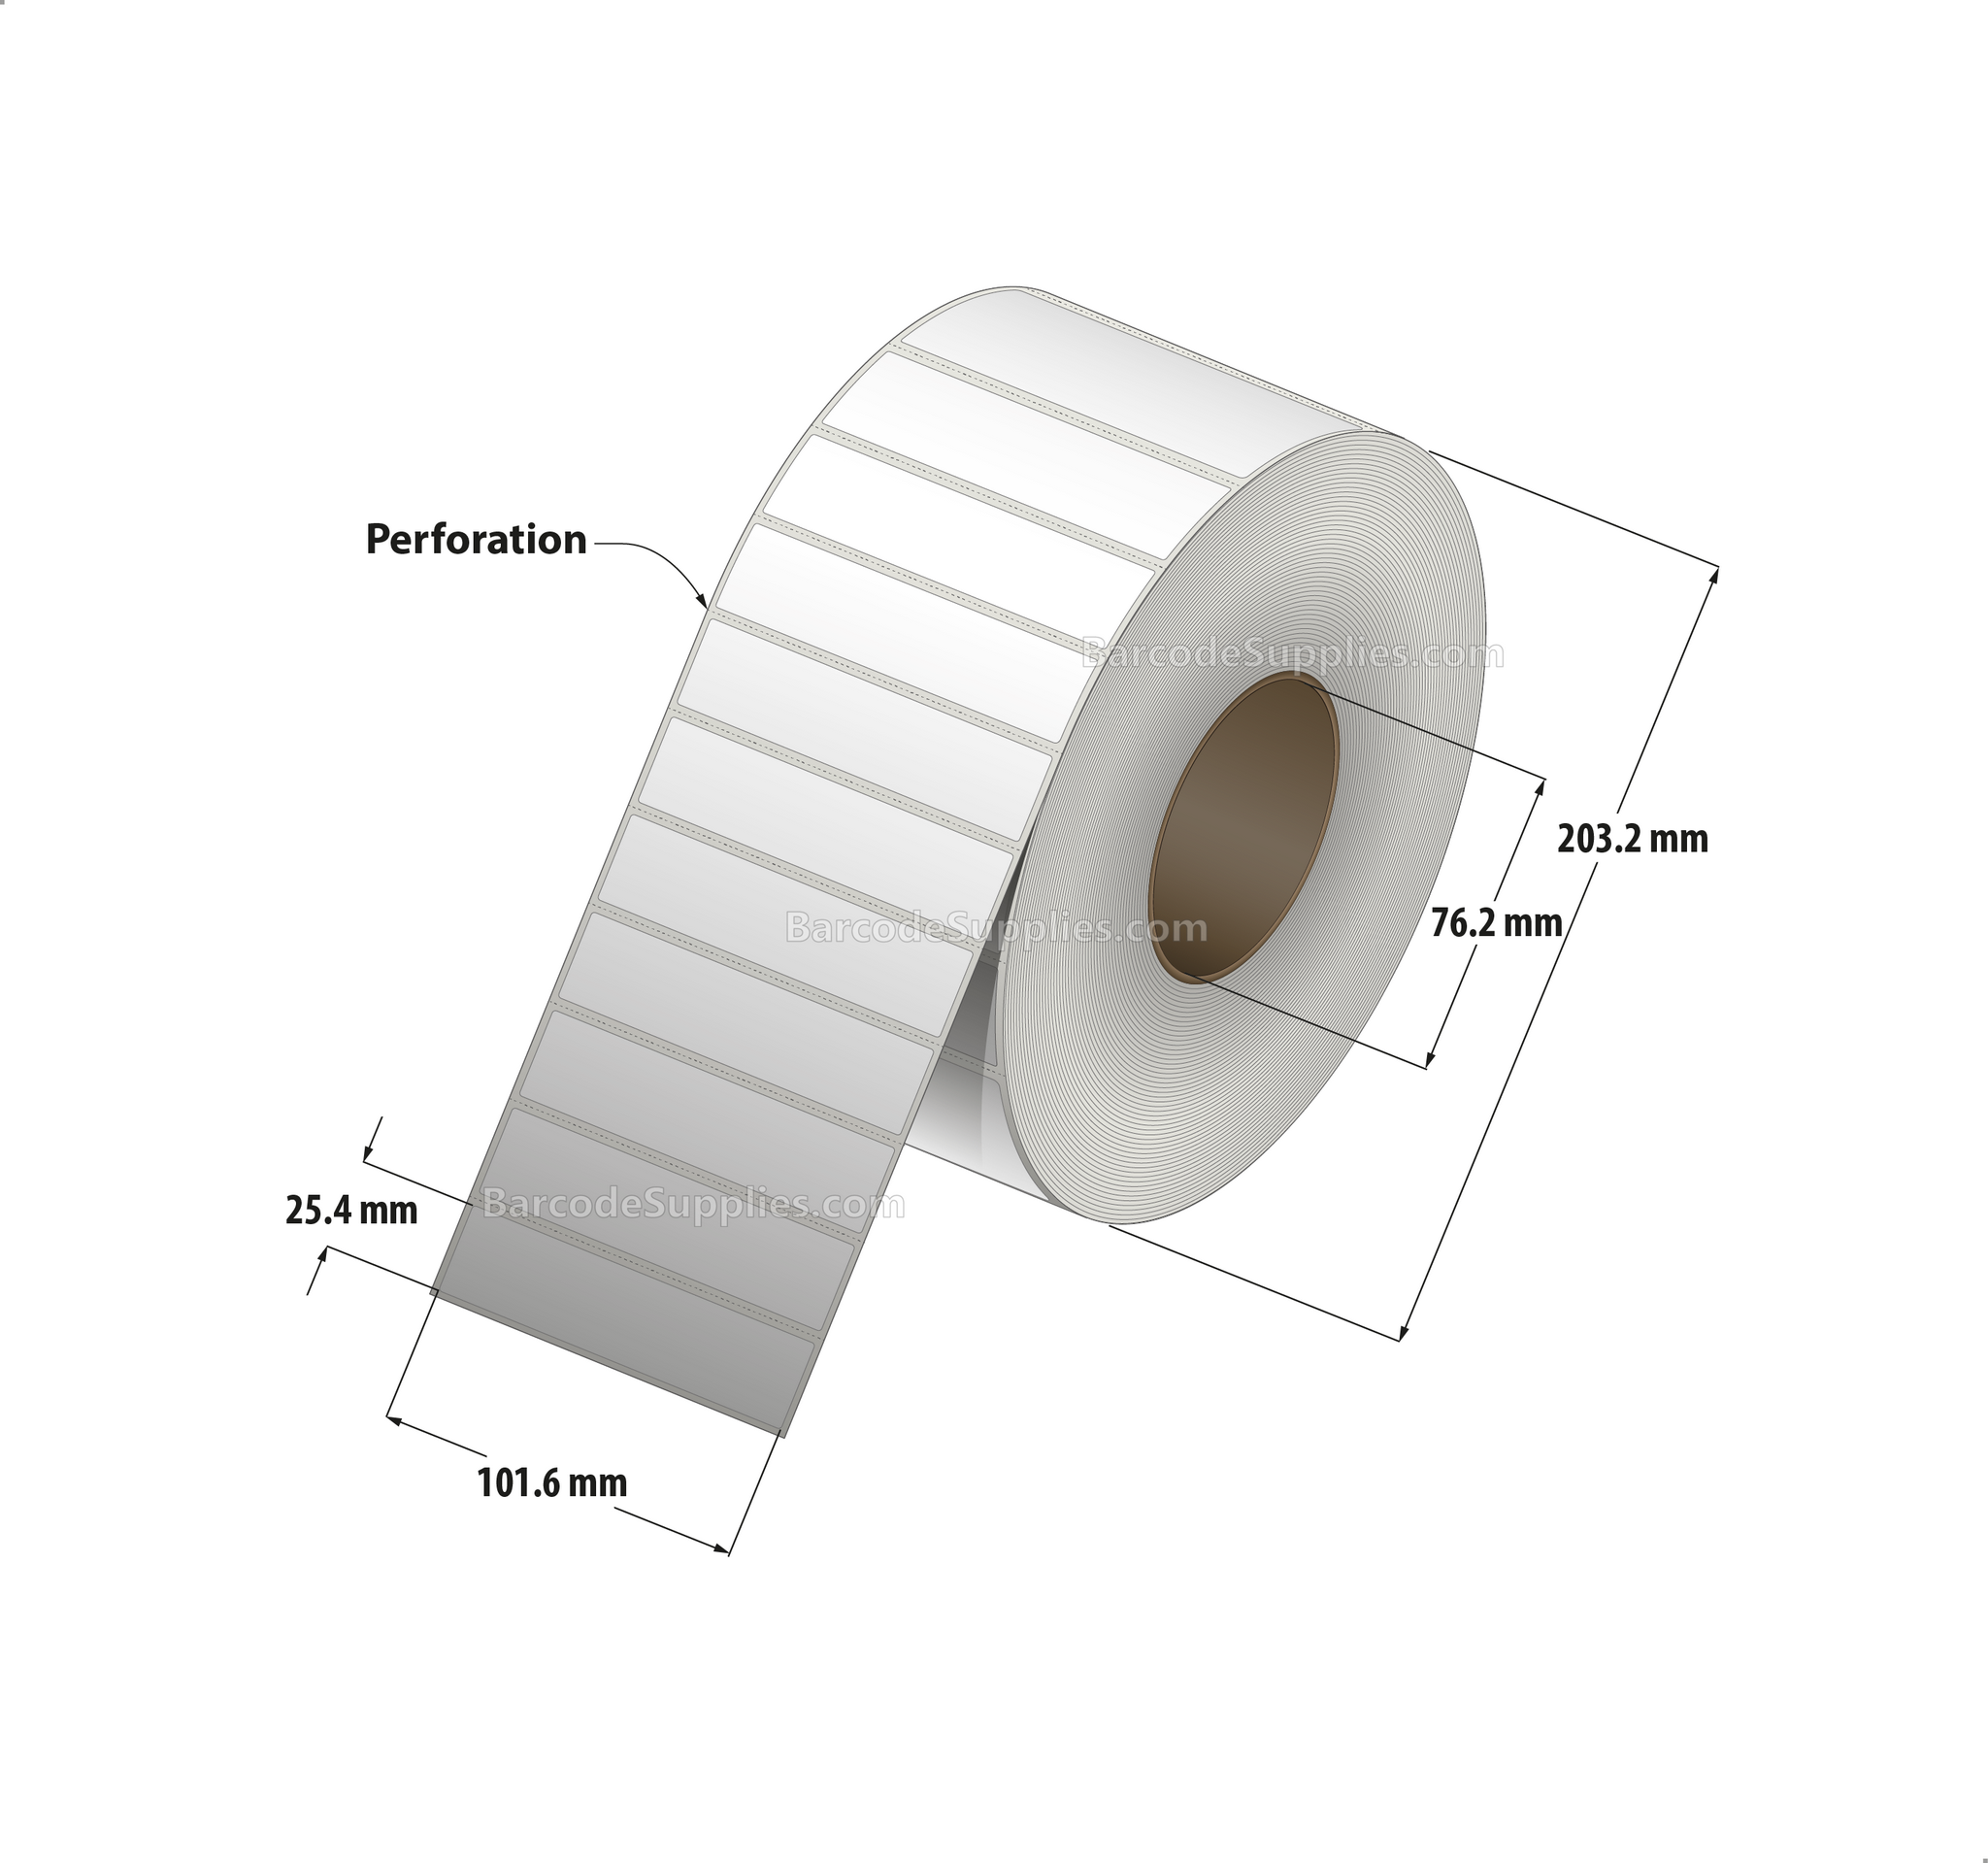 4 x 1 Direct Thermal White Labels With Rubber Adhesive - Perforated - 5560 Labels Per Roll - Carton Of 4 Rolls - 22240 Labels Total - MPN: DT400100-3P